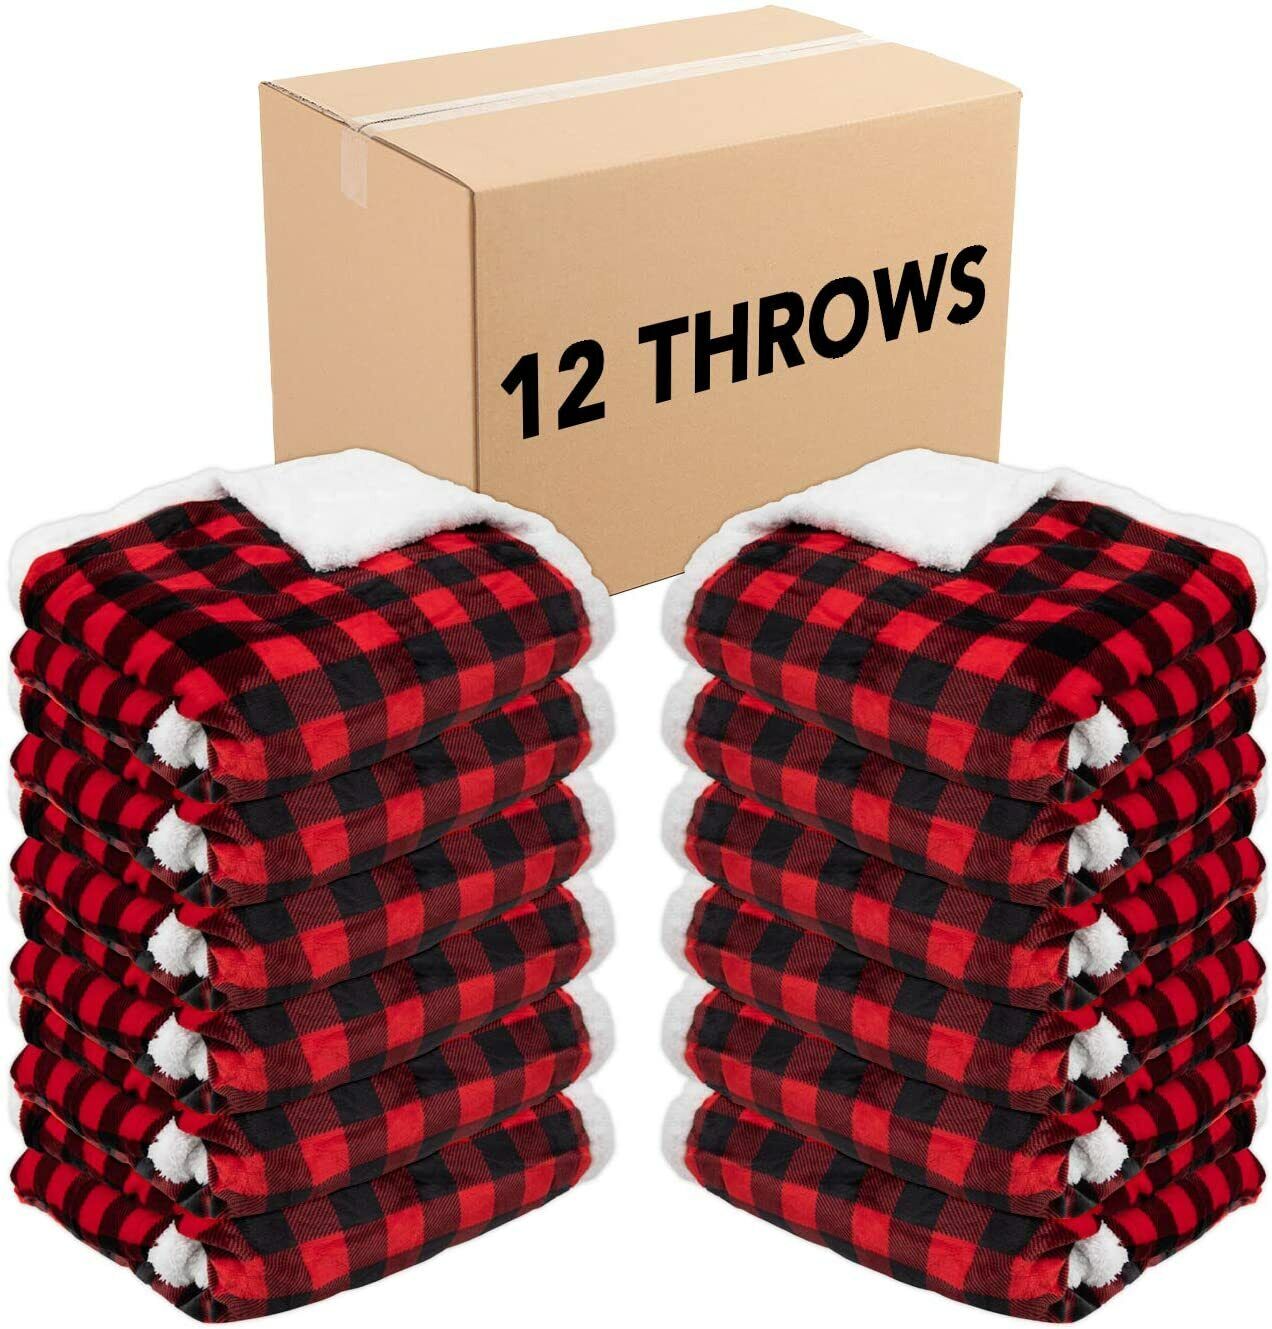 12 Pack of Buffalo Plaid Throw Blankets 50 x 70 Red & Black Soft Flannel Sherpa Arkwright Does Not Apply